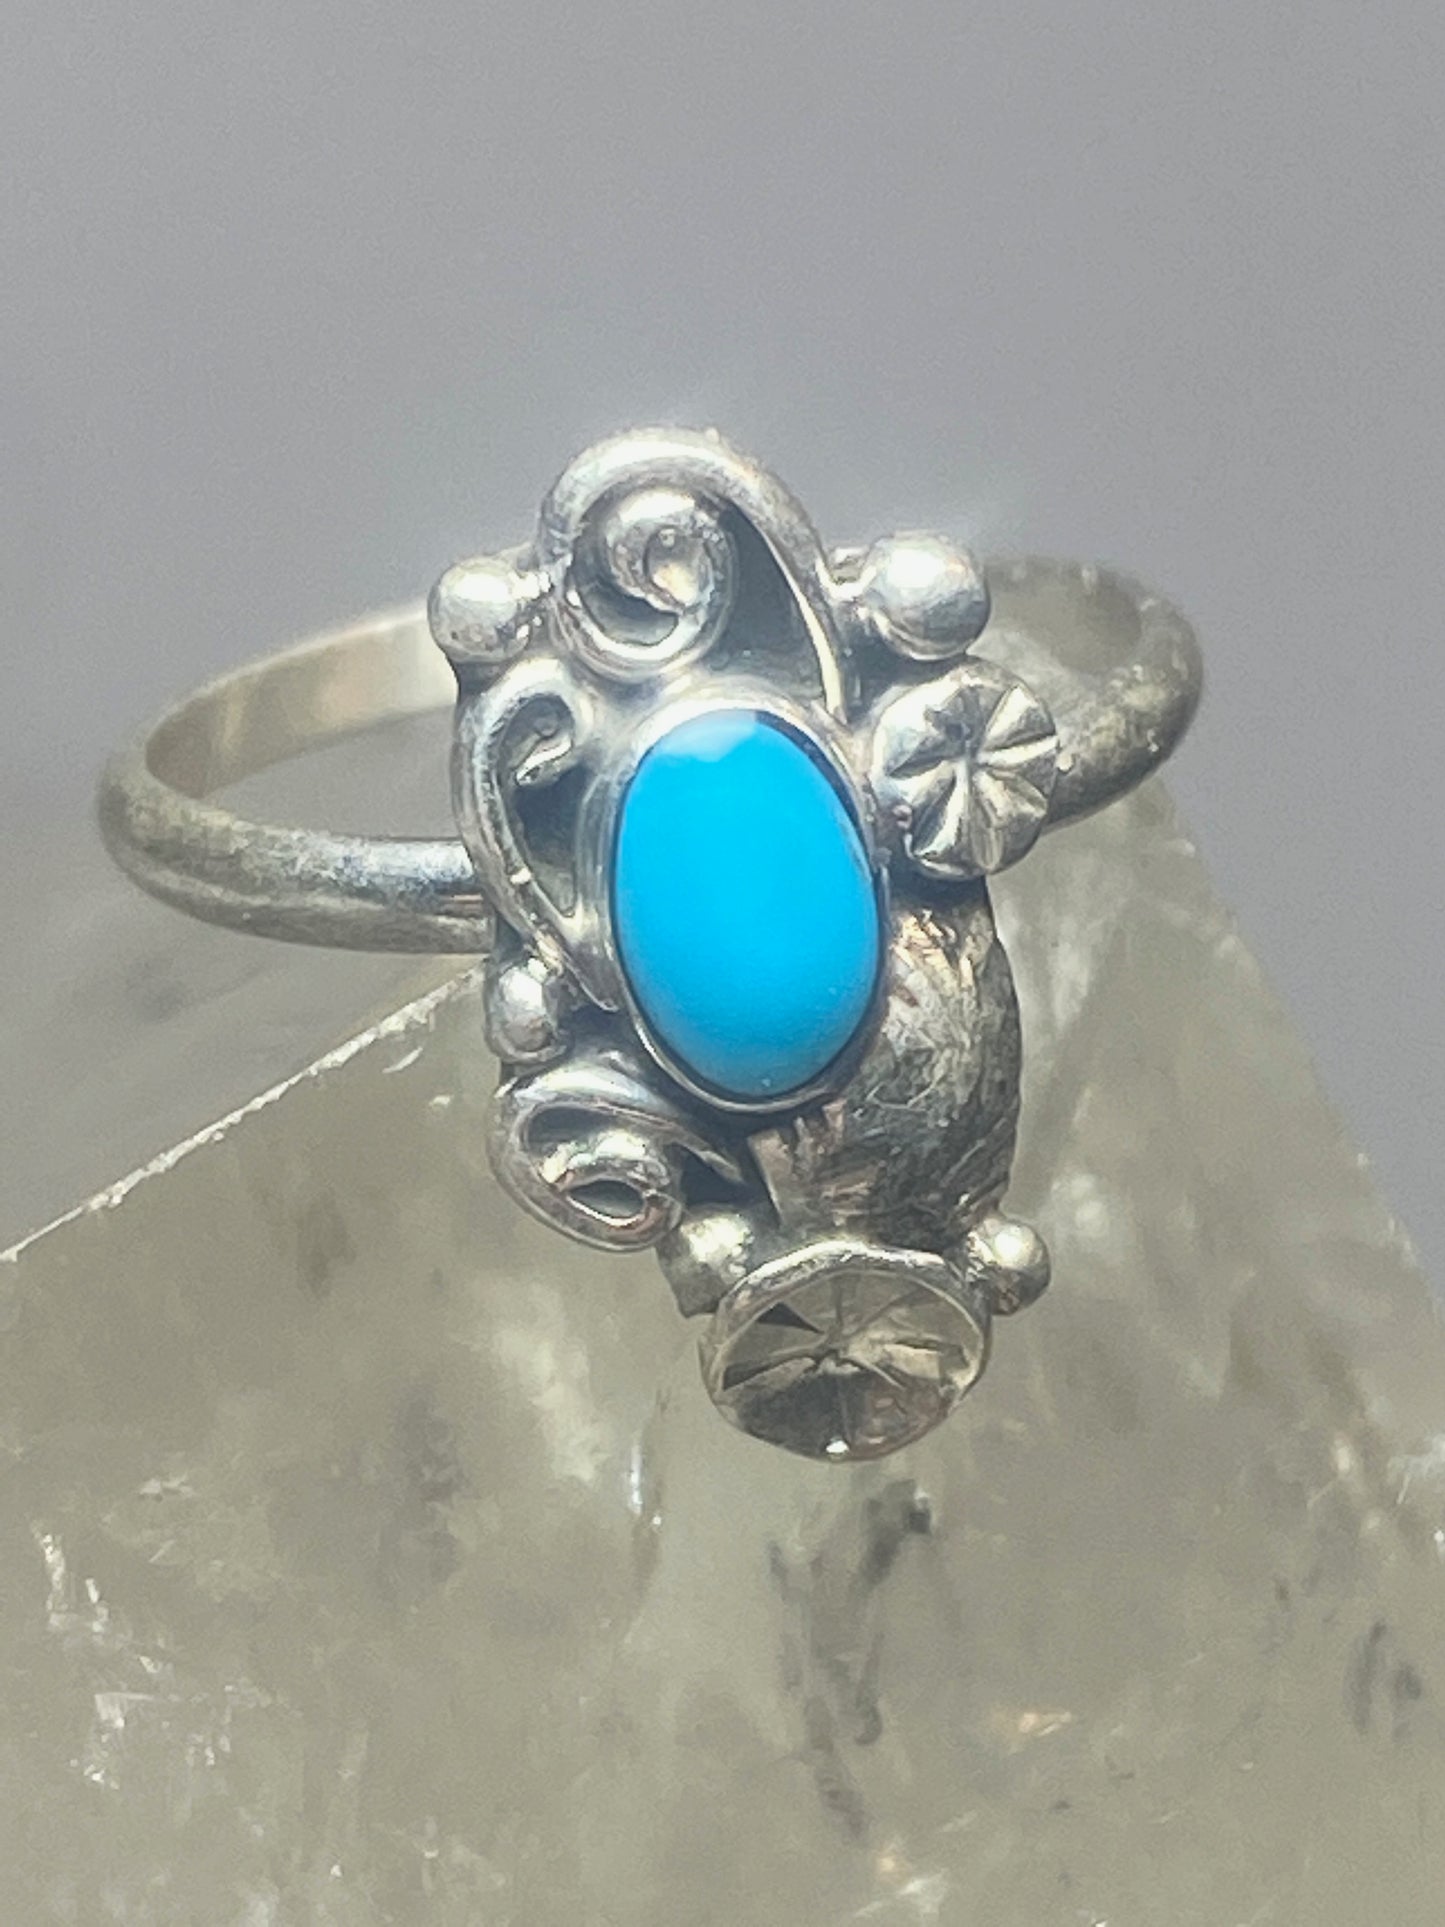 Turquoise ring southwest pinky floral leaves blossom baby children women girls